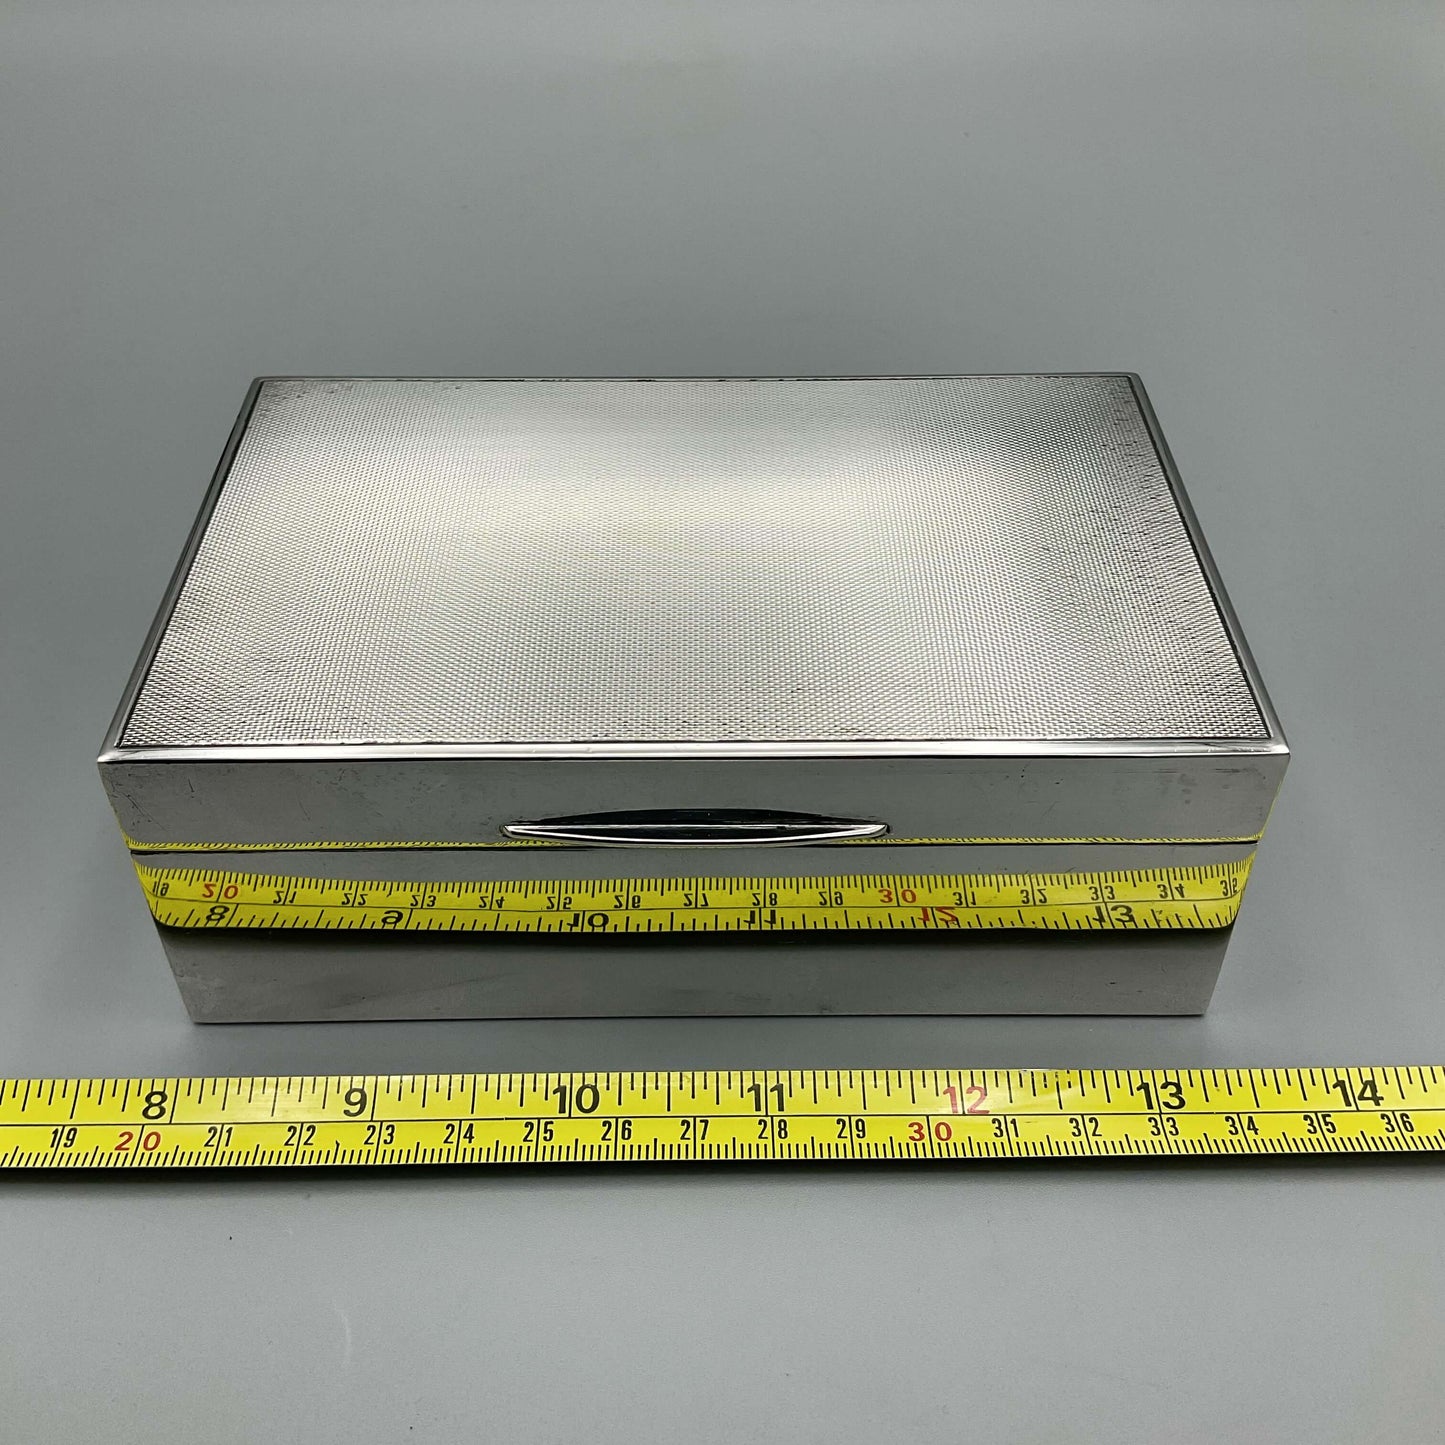 1960s Silver cigarette box next to tape measure showing width as approx 14cm